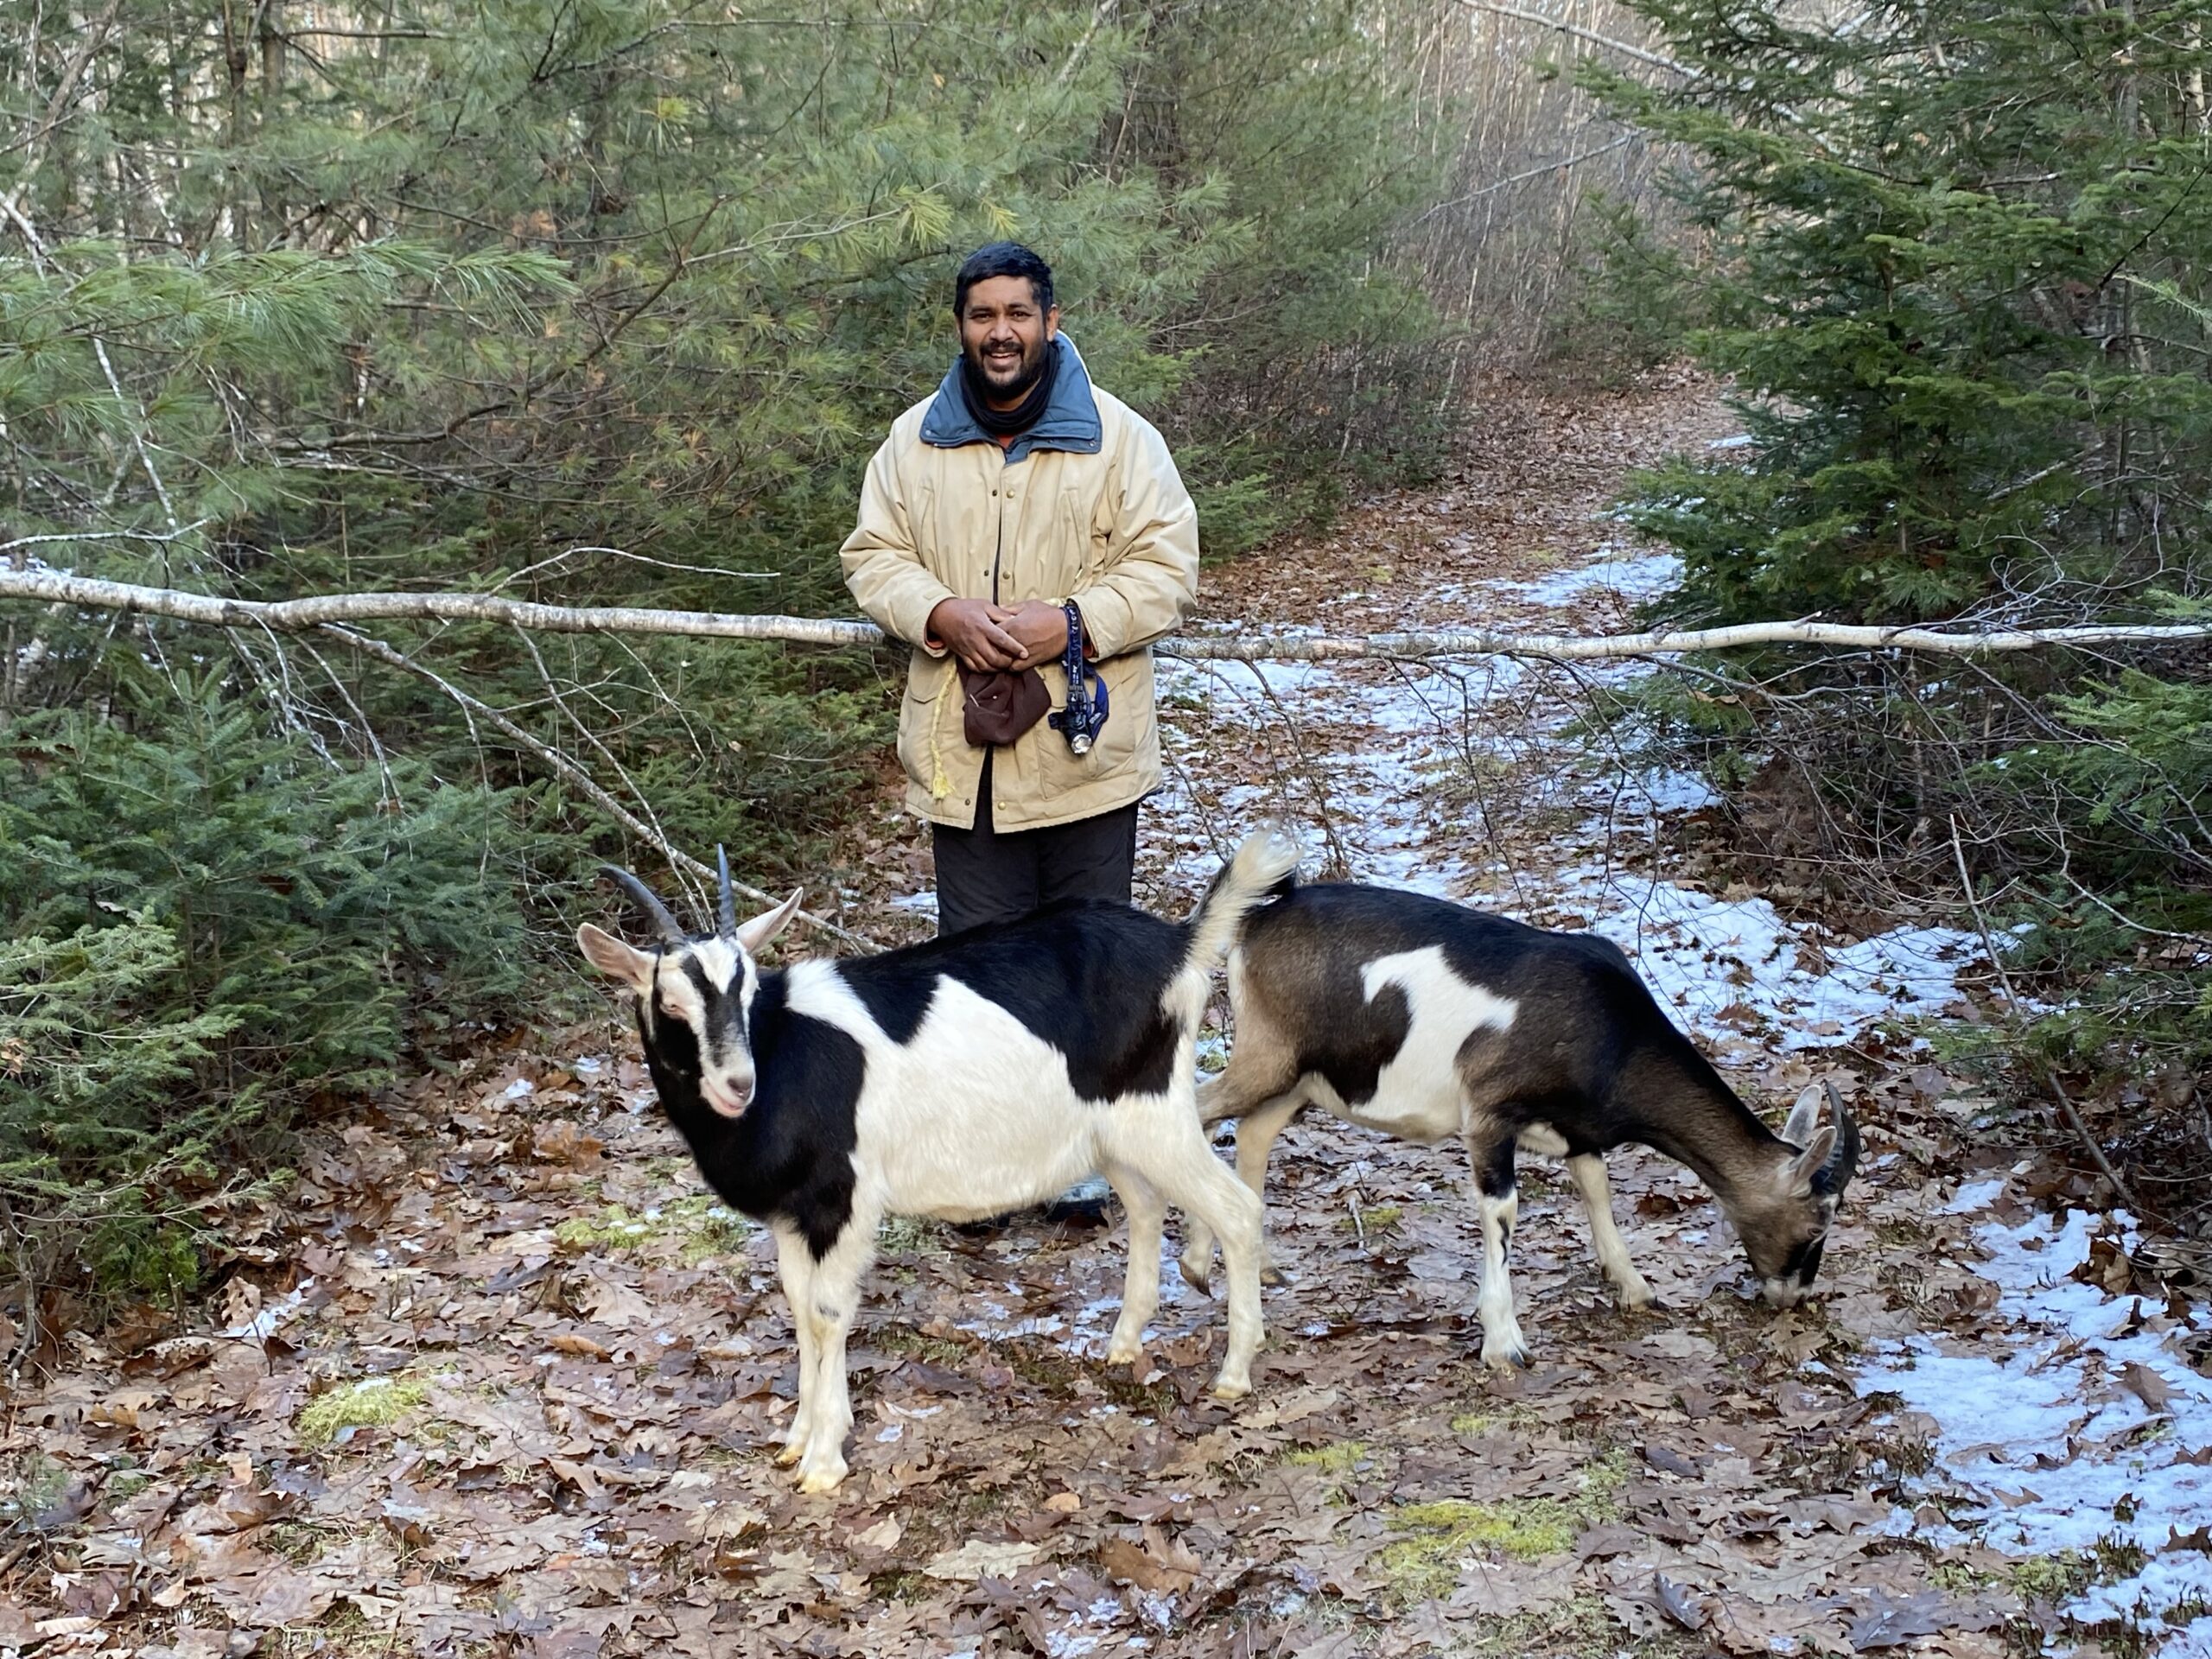 Farmer Anil with two goats on a goat hike in Somerville Maine at Pumpkin Vine Family Farm.